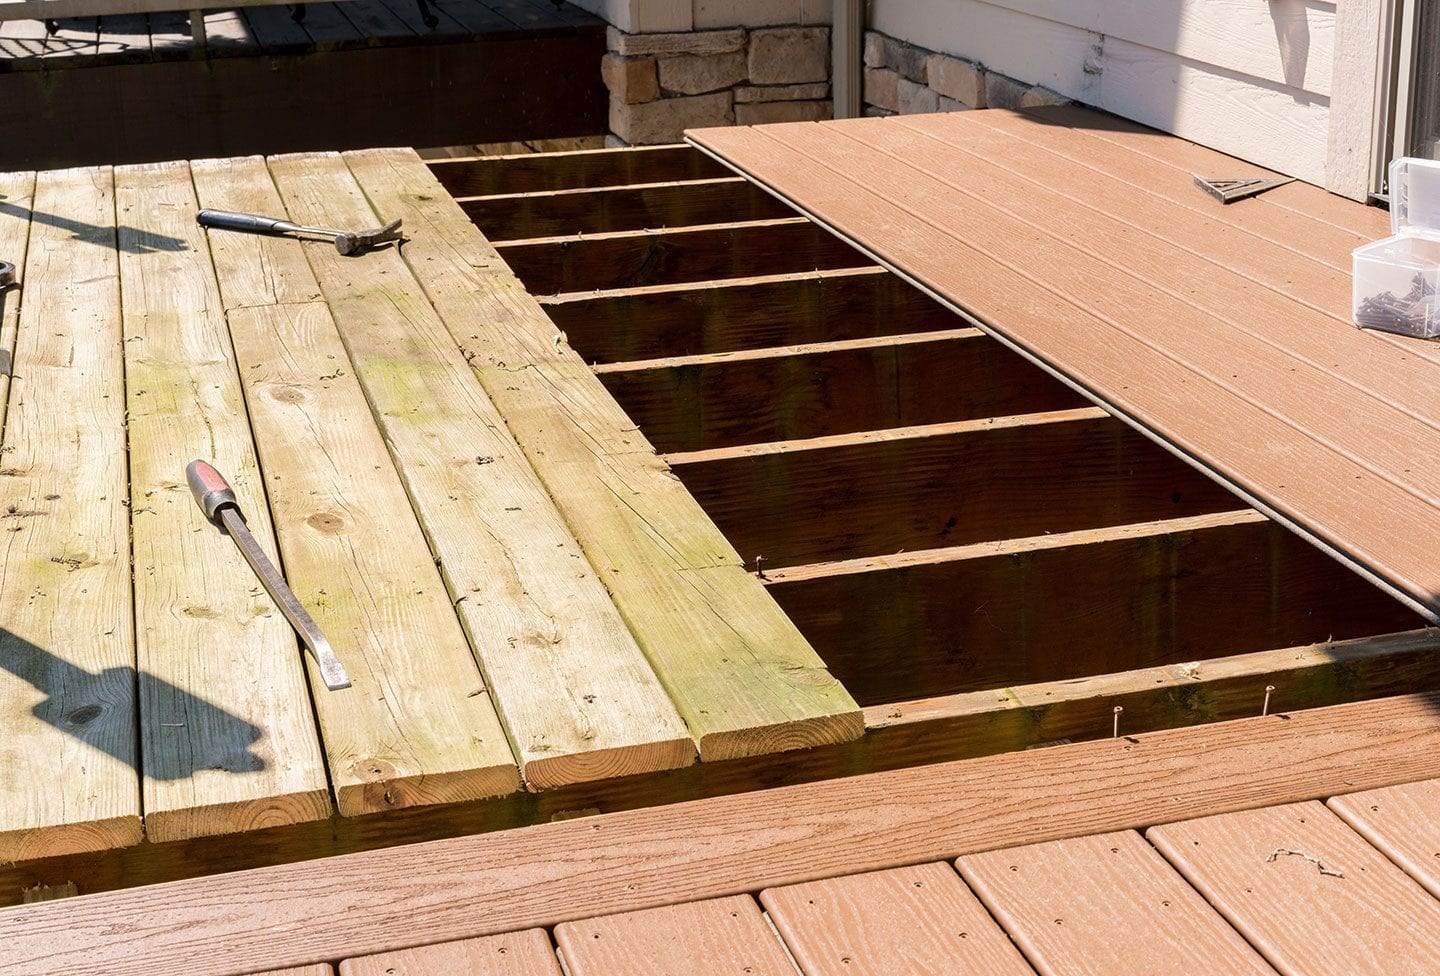 Is Re-Decking The Best Option For Your Old Deck?